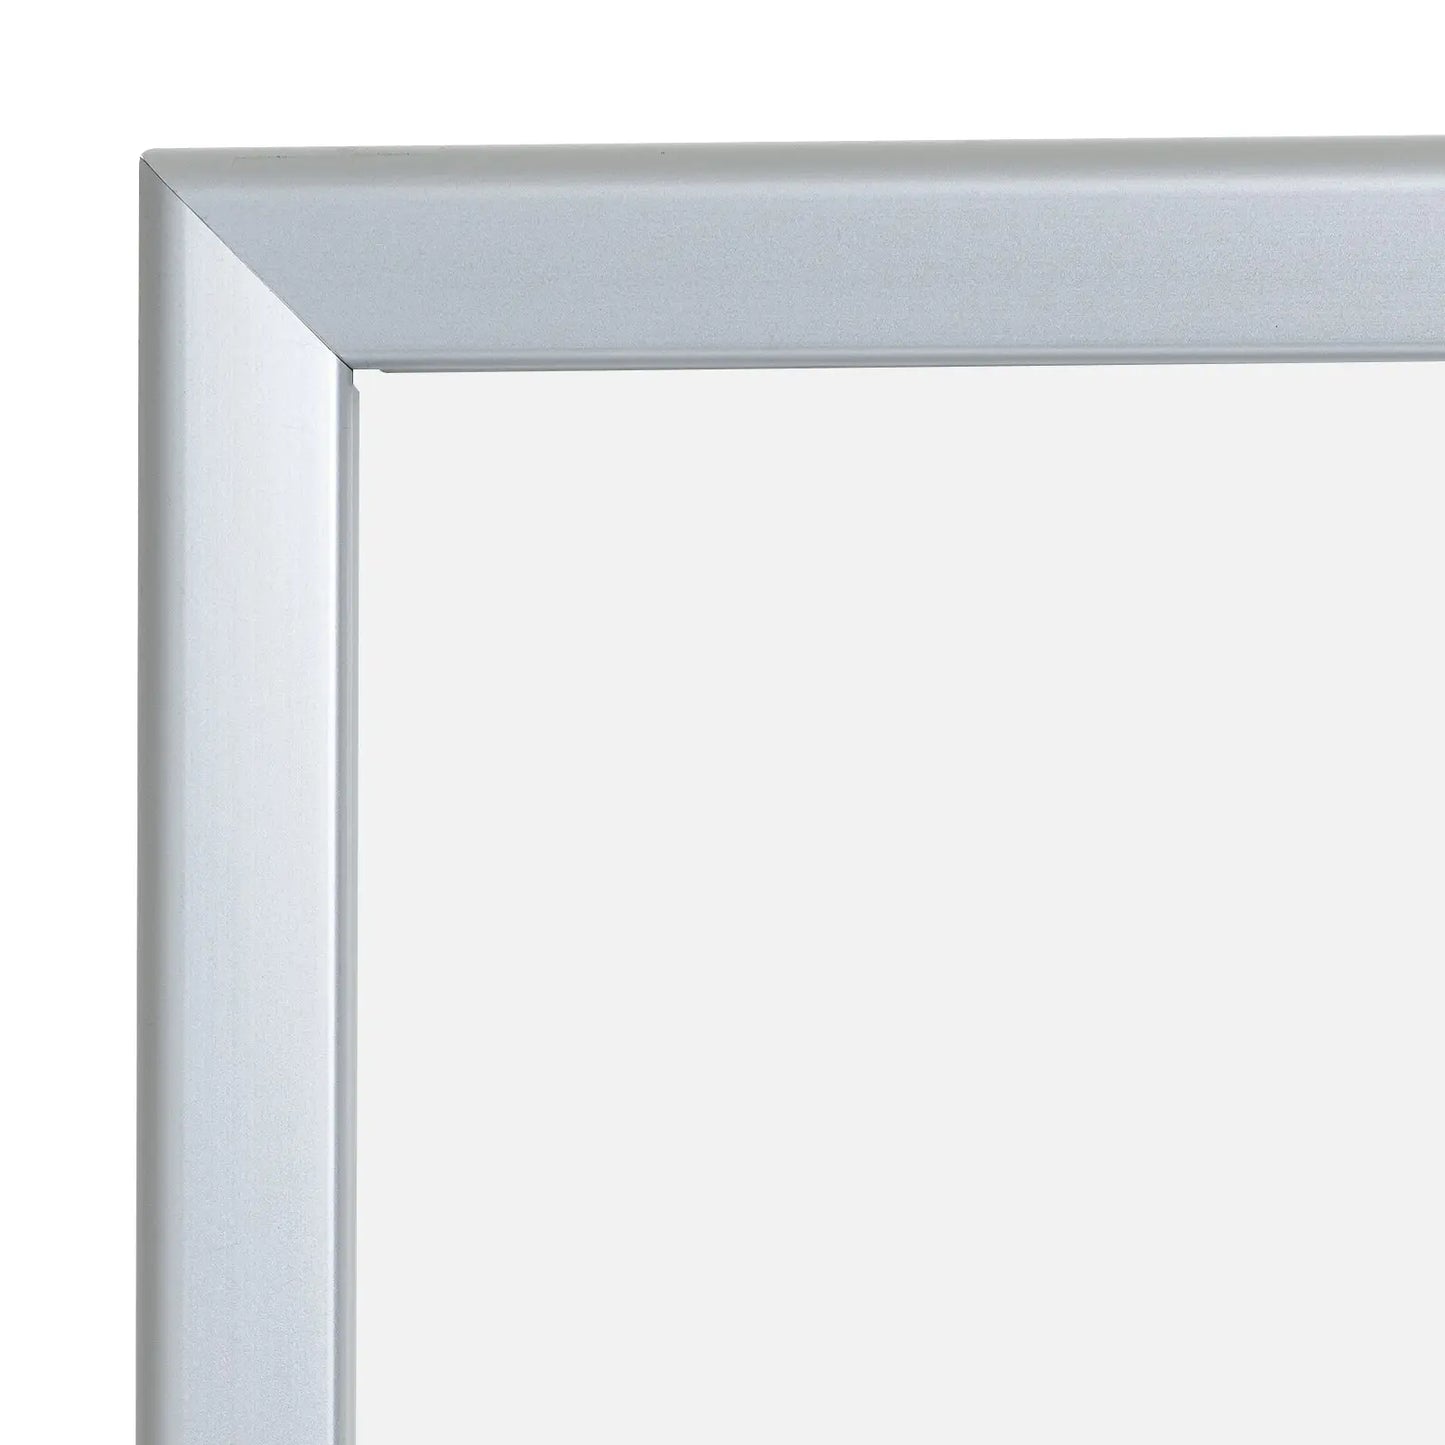 30x40 Silver Snap Frame - 1.25" Profile - Snap Frames Direct